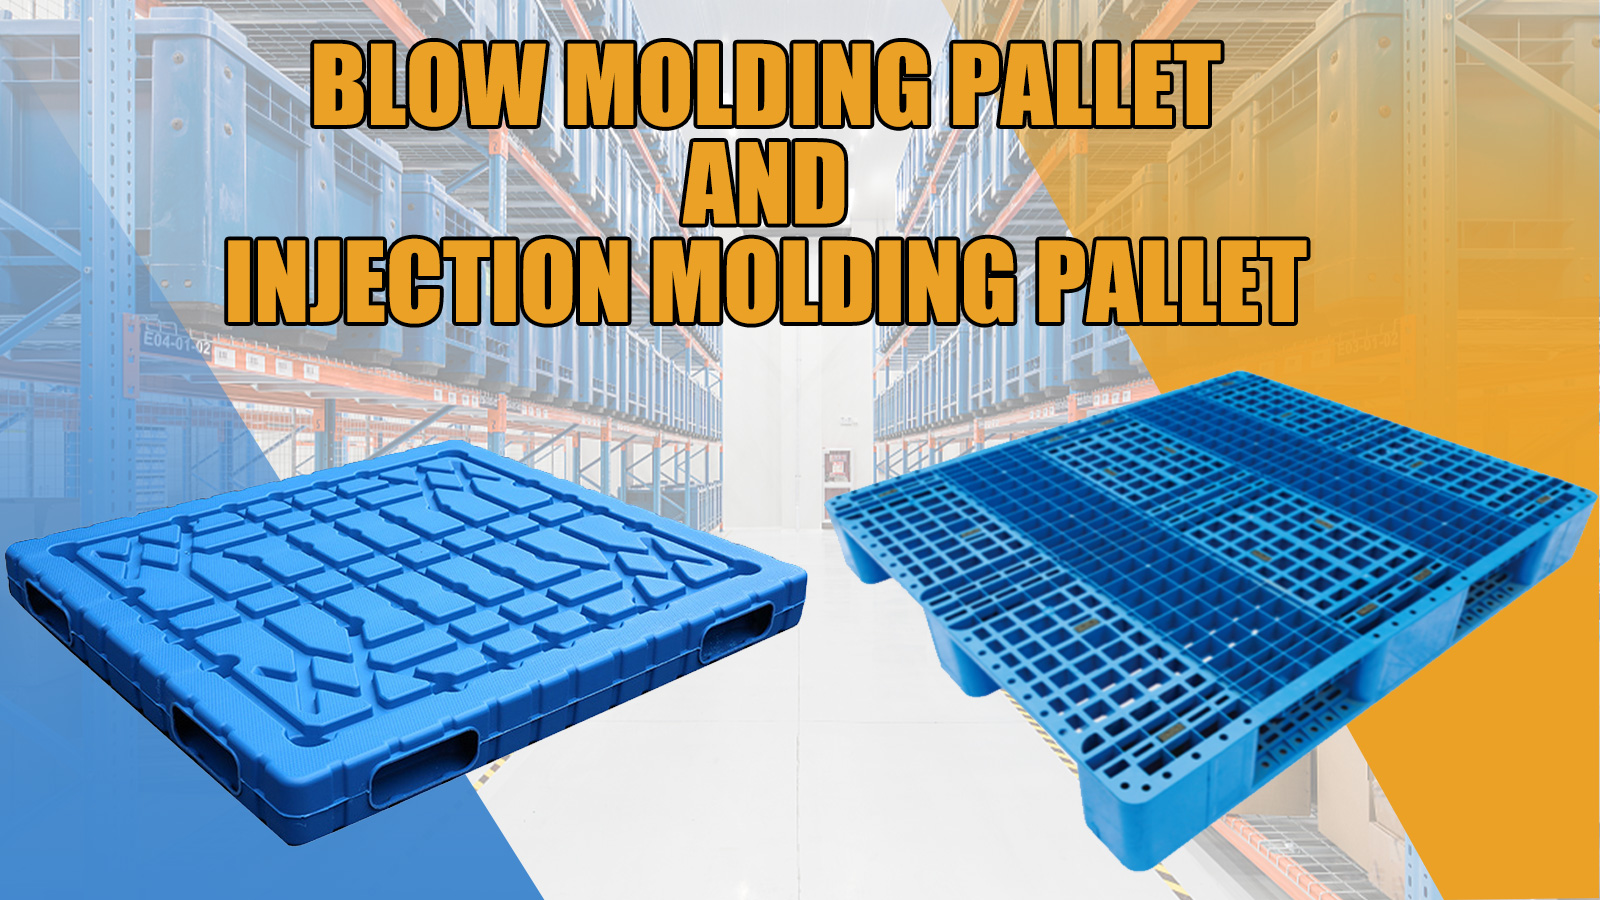 What’s the difference between a blow molding pallet and an injection molding pallet?